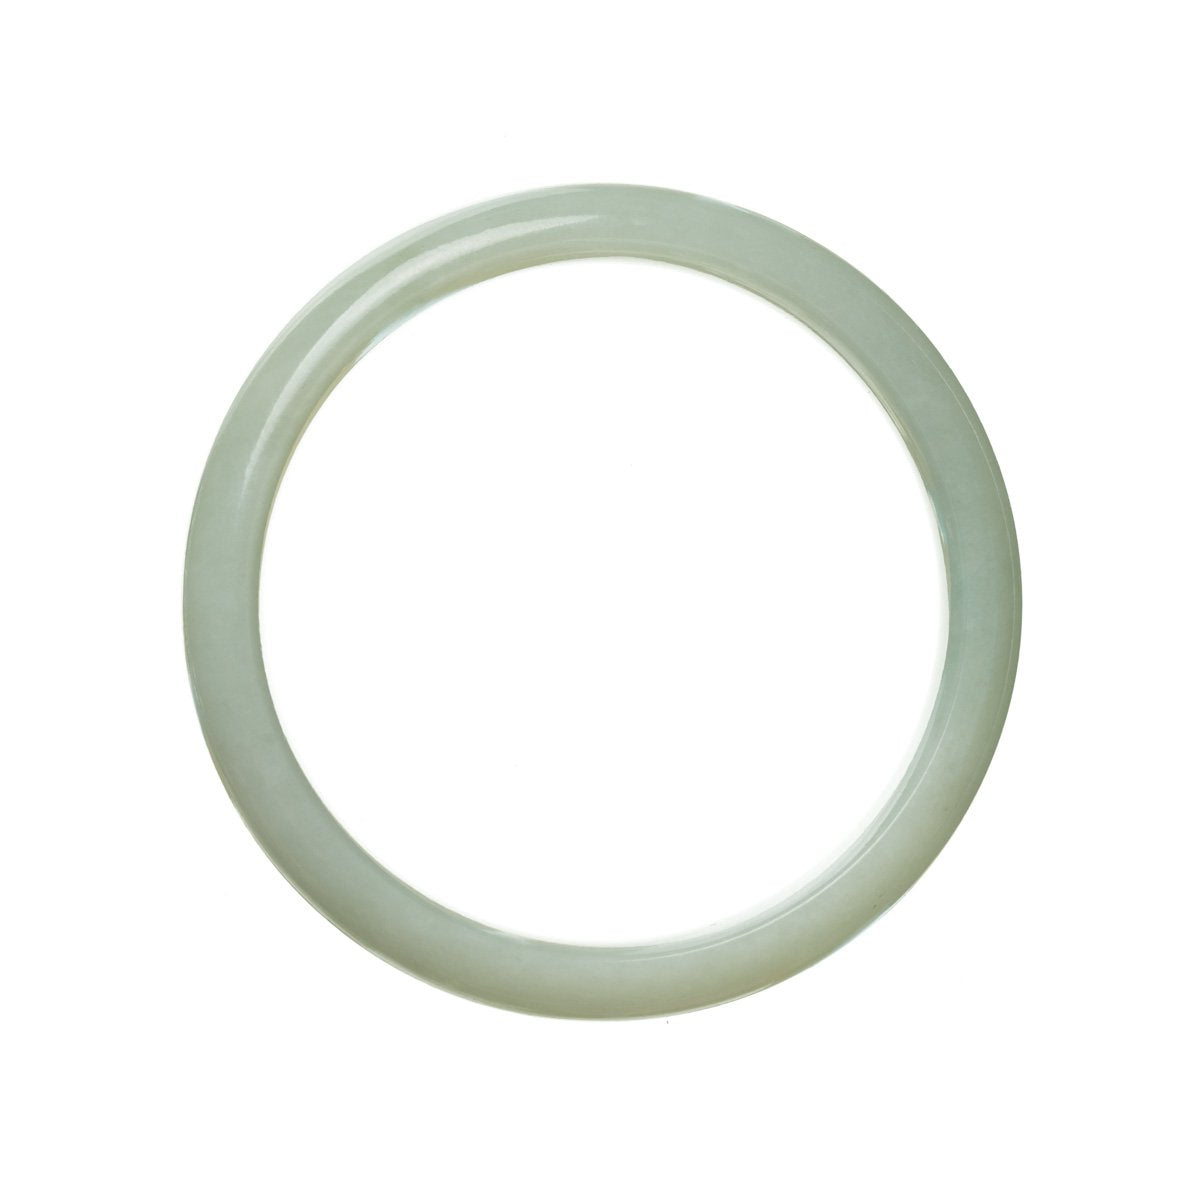 A half-moon shaped bangle made of real untreated pale green Burma Jade, measuring 56mm in size.